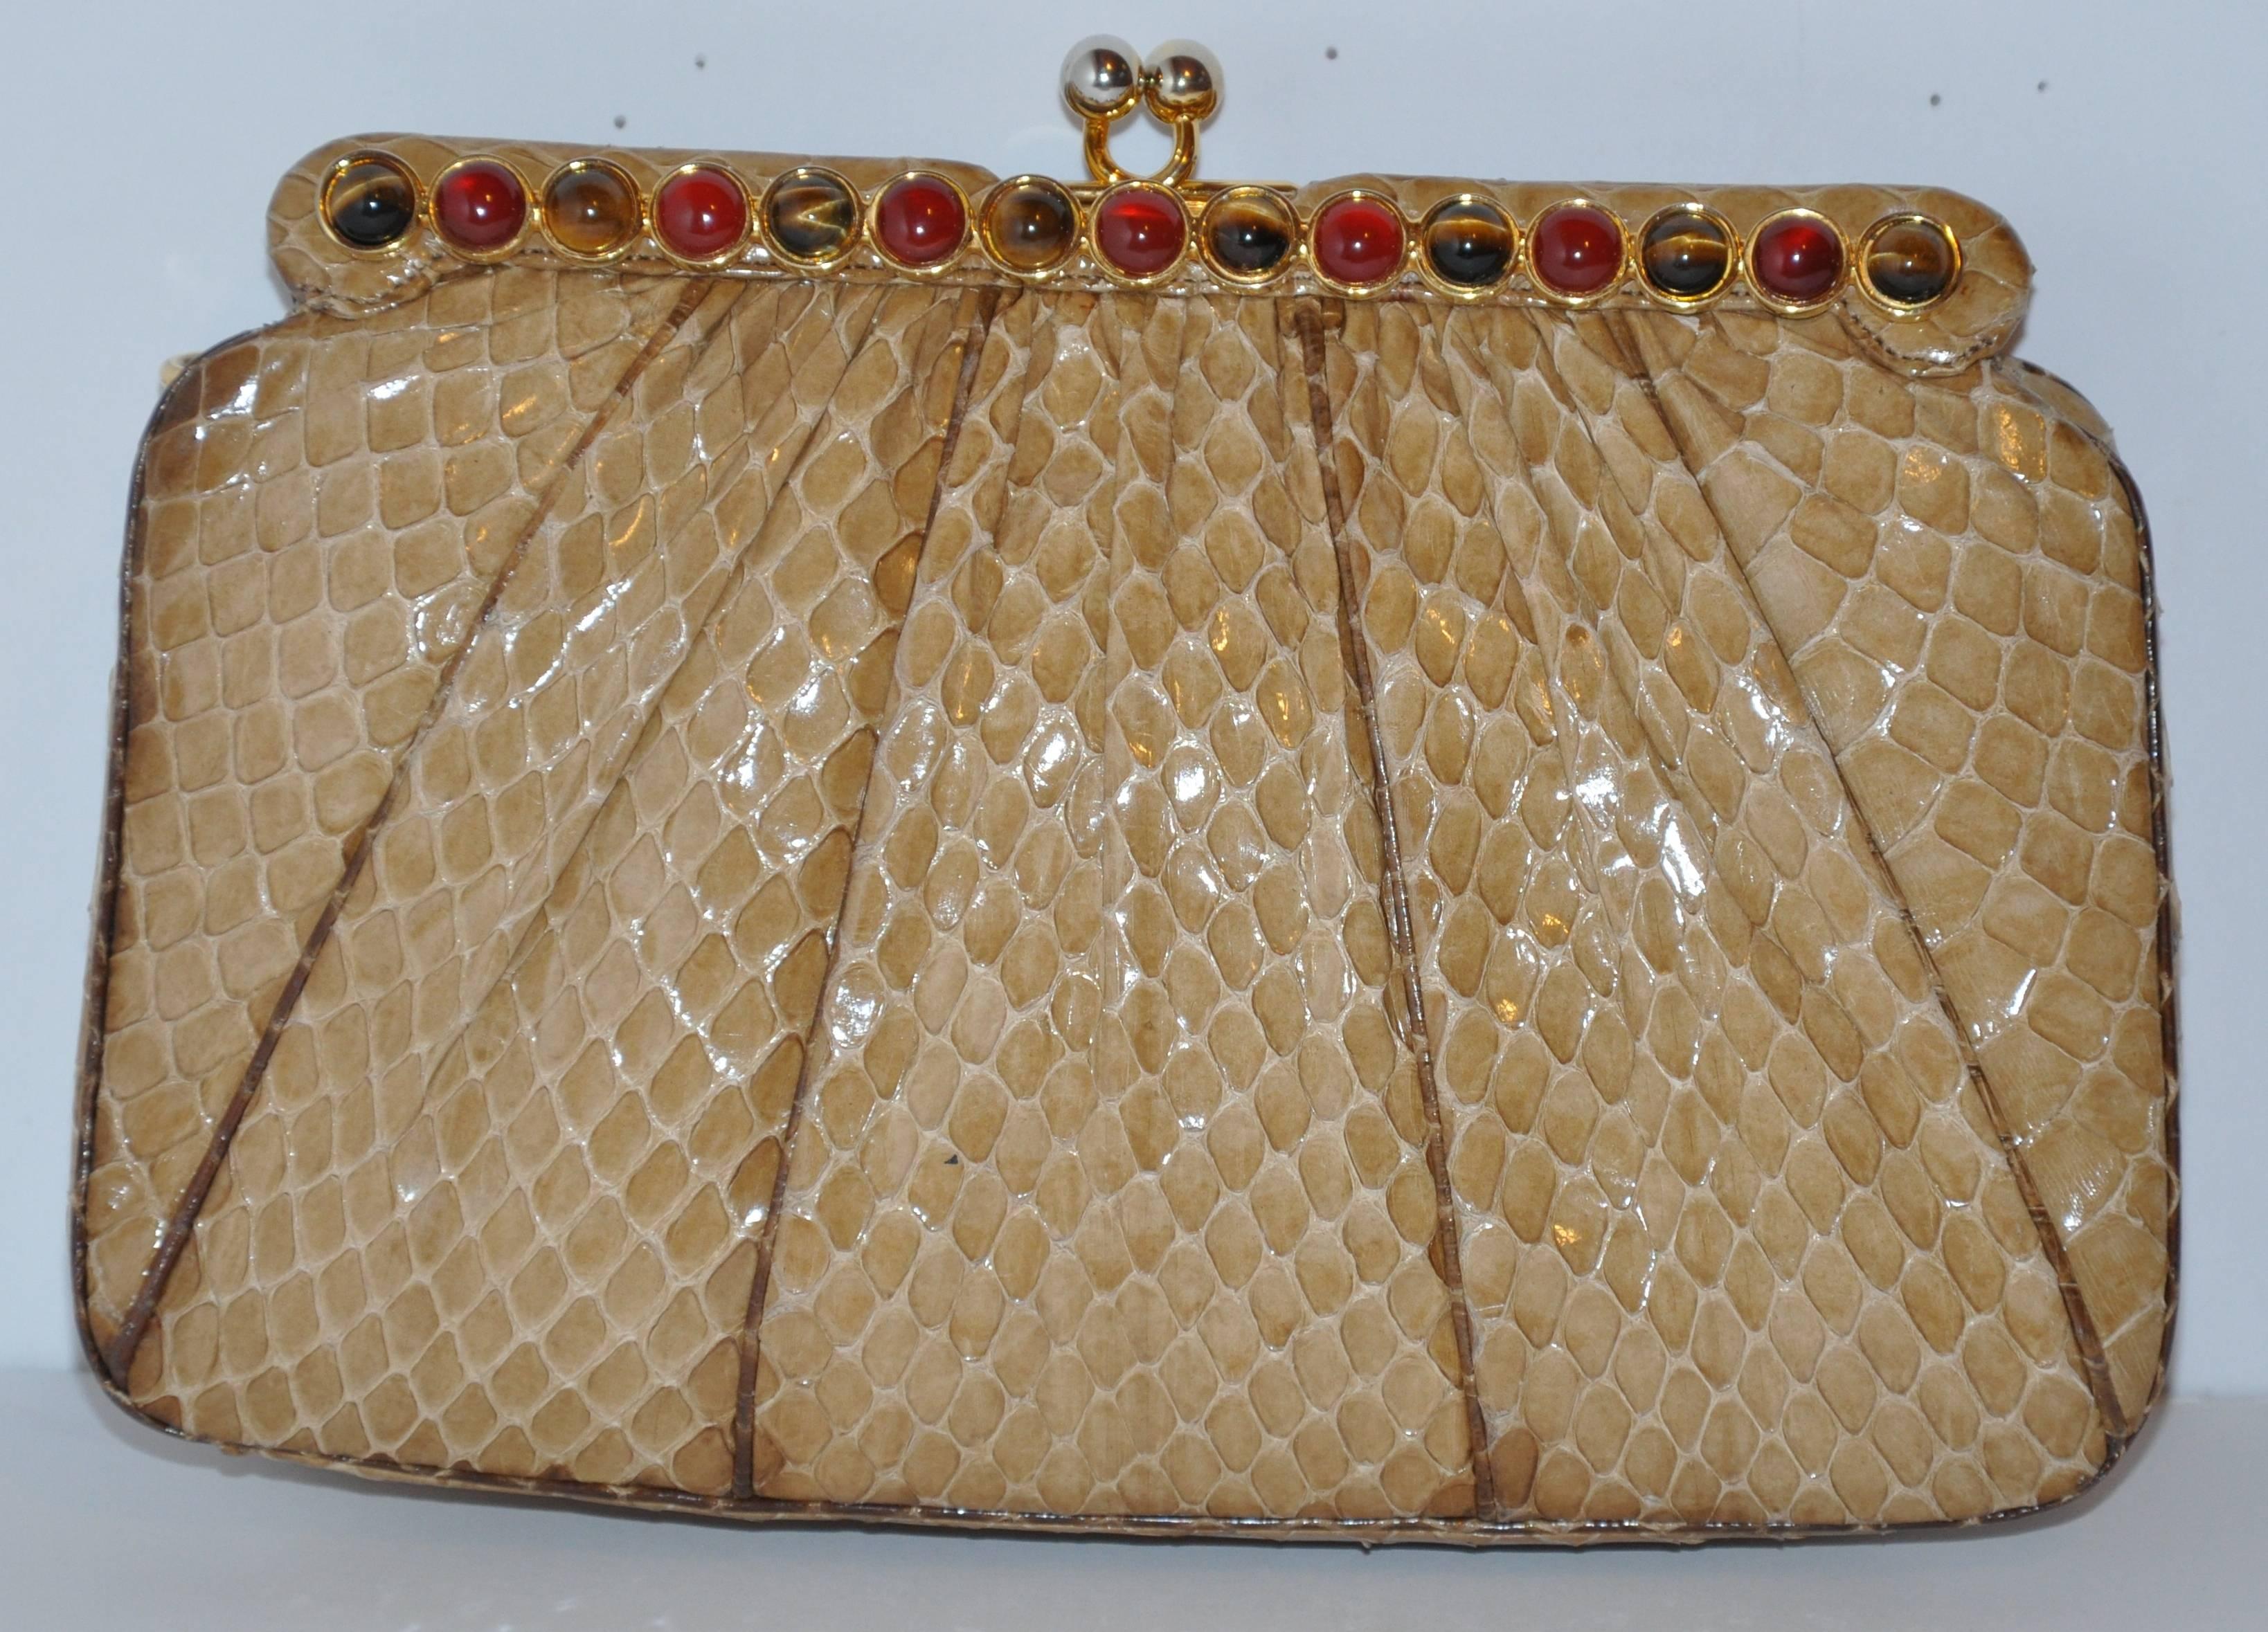            Judith Leiber's wonderfully detailed beige python evening clutch has the optional use of a evening shoulder bag with their removable straps of python and gold hardware. The evening clutch is highly detailed with tiger's eye and garnet